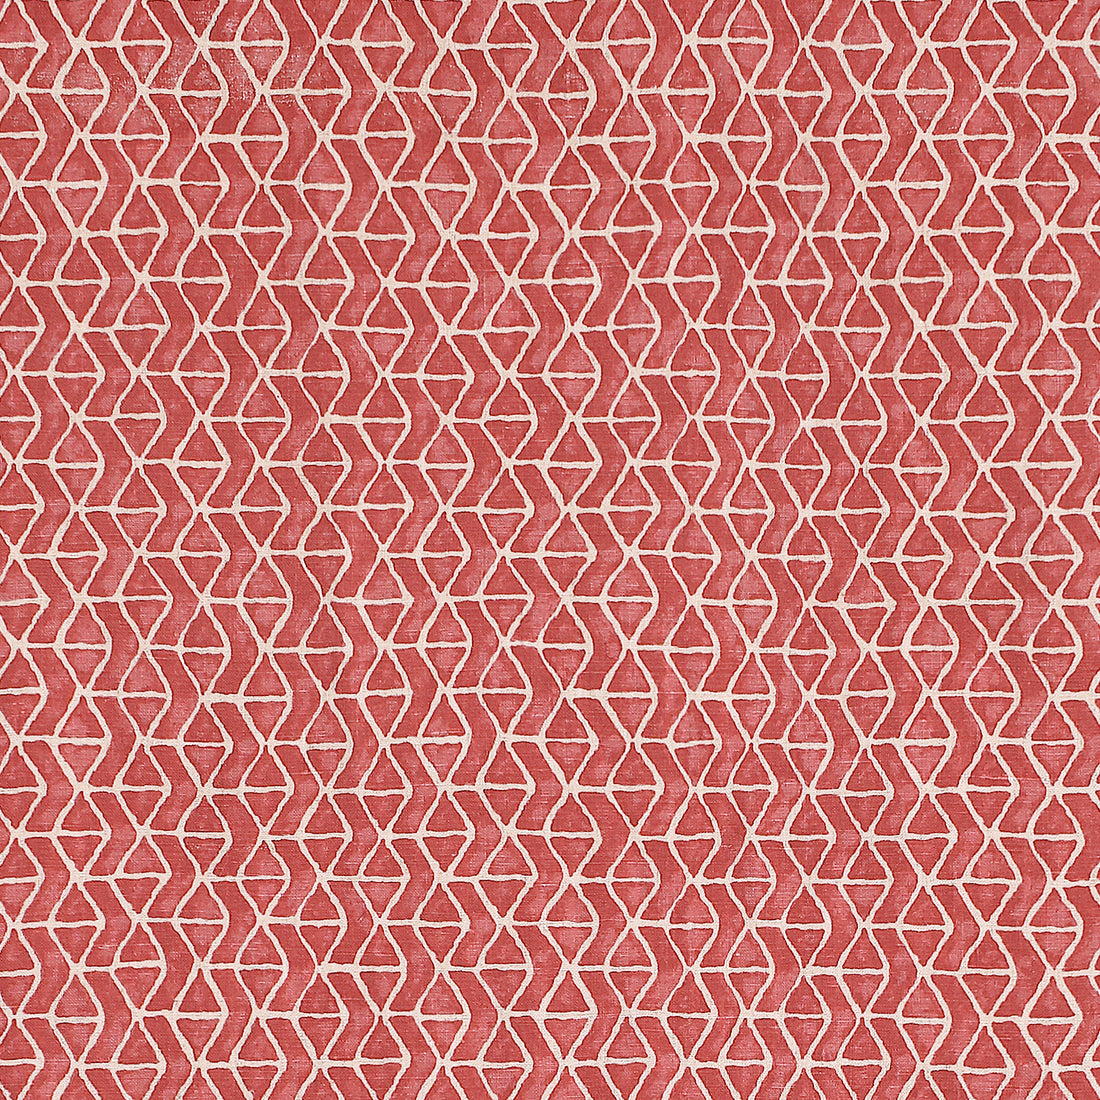 Stony Brook fabric in coral color - pattern number F942002 - by Thibaut in the Sojourn collection